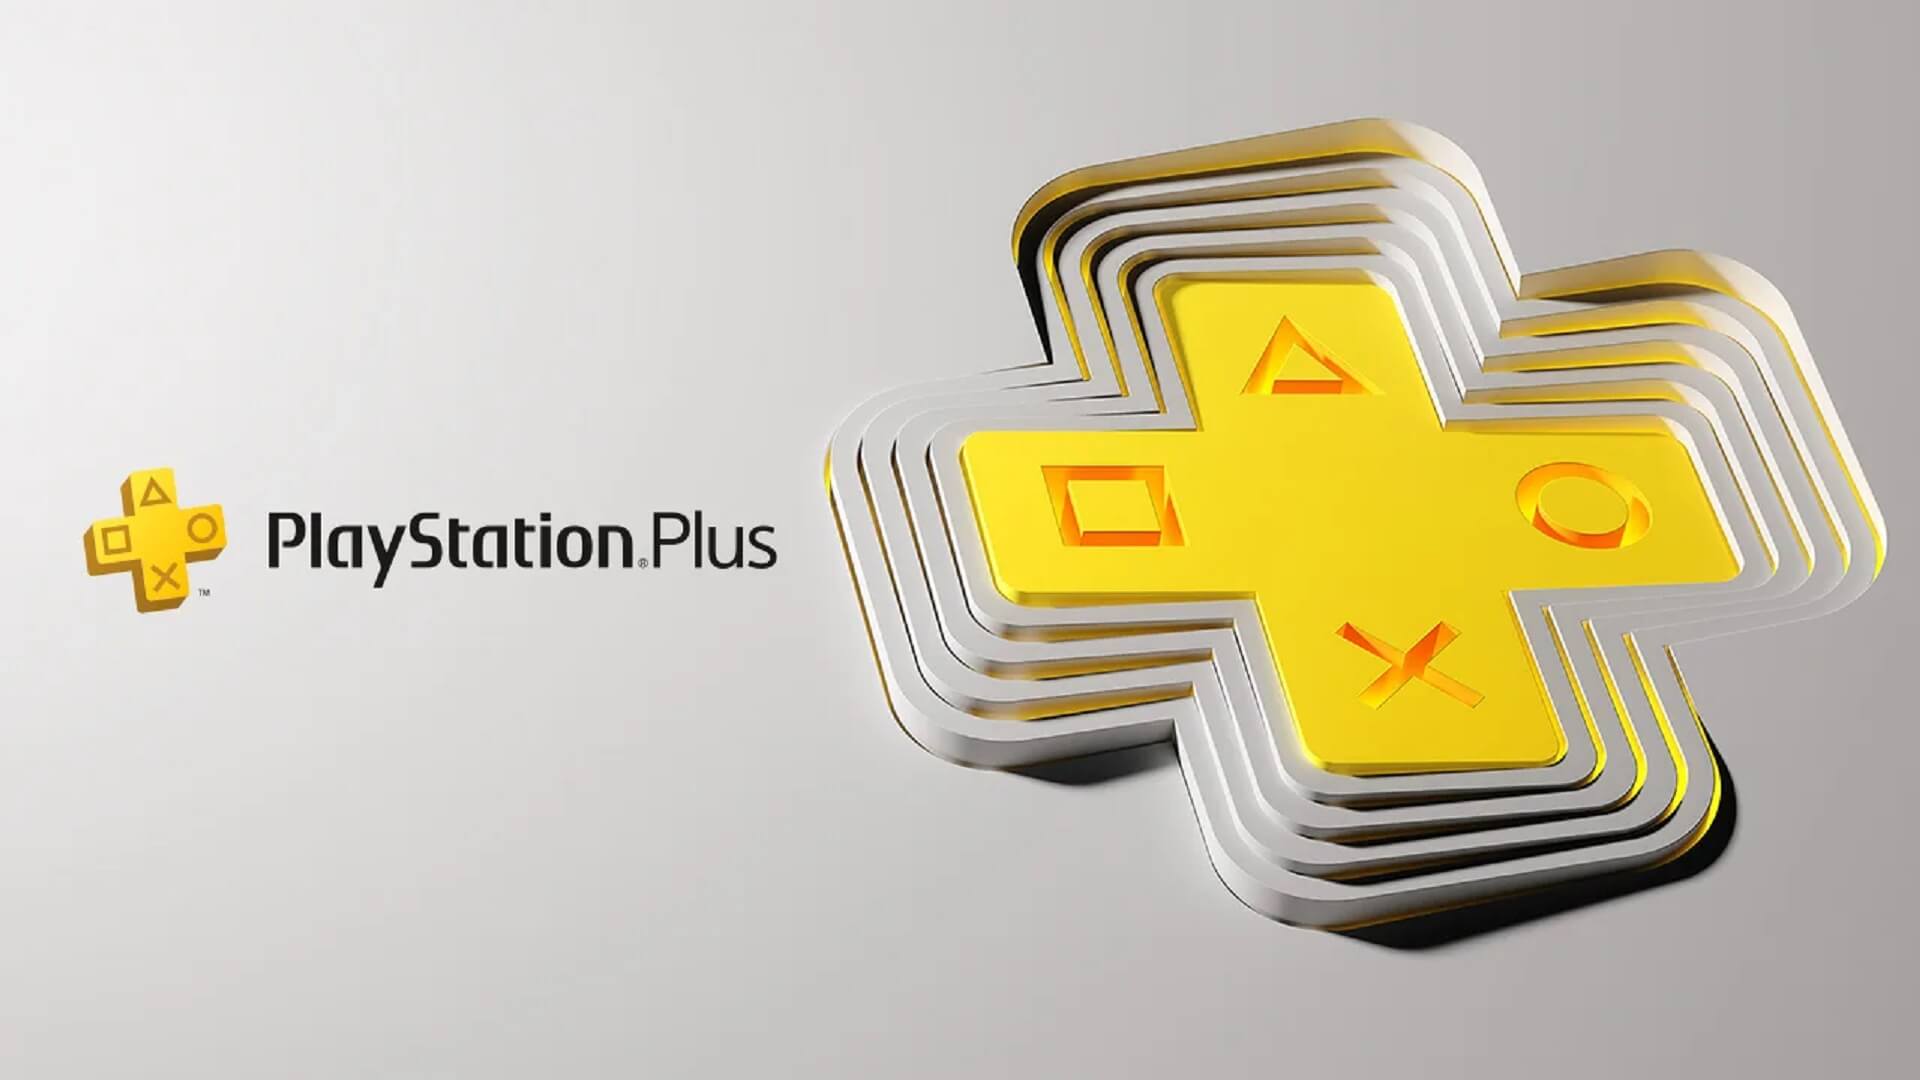 The logo for the PlayStation Plus service